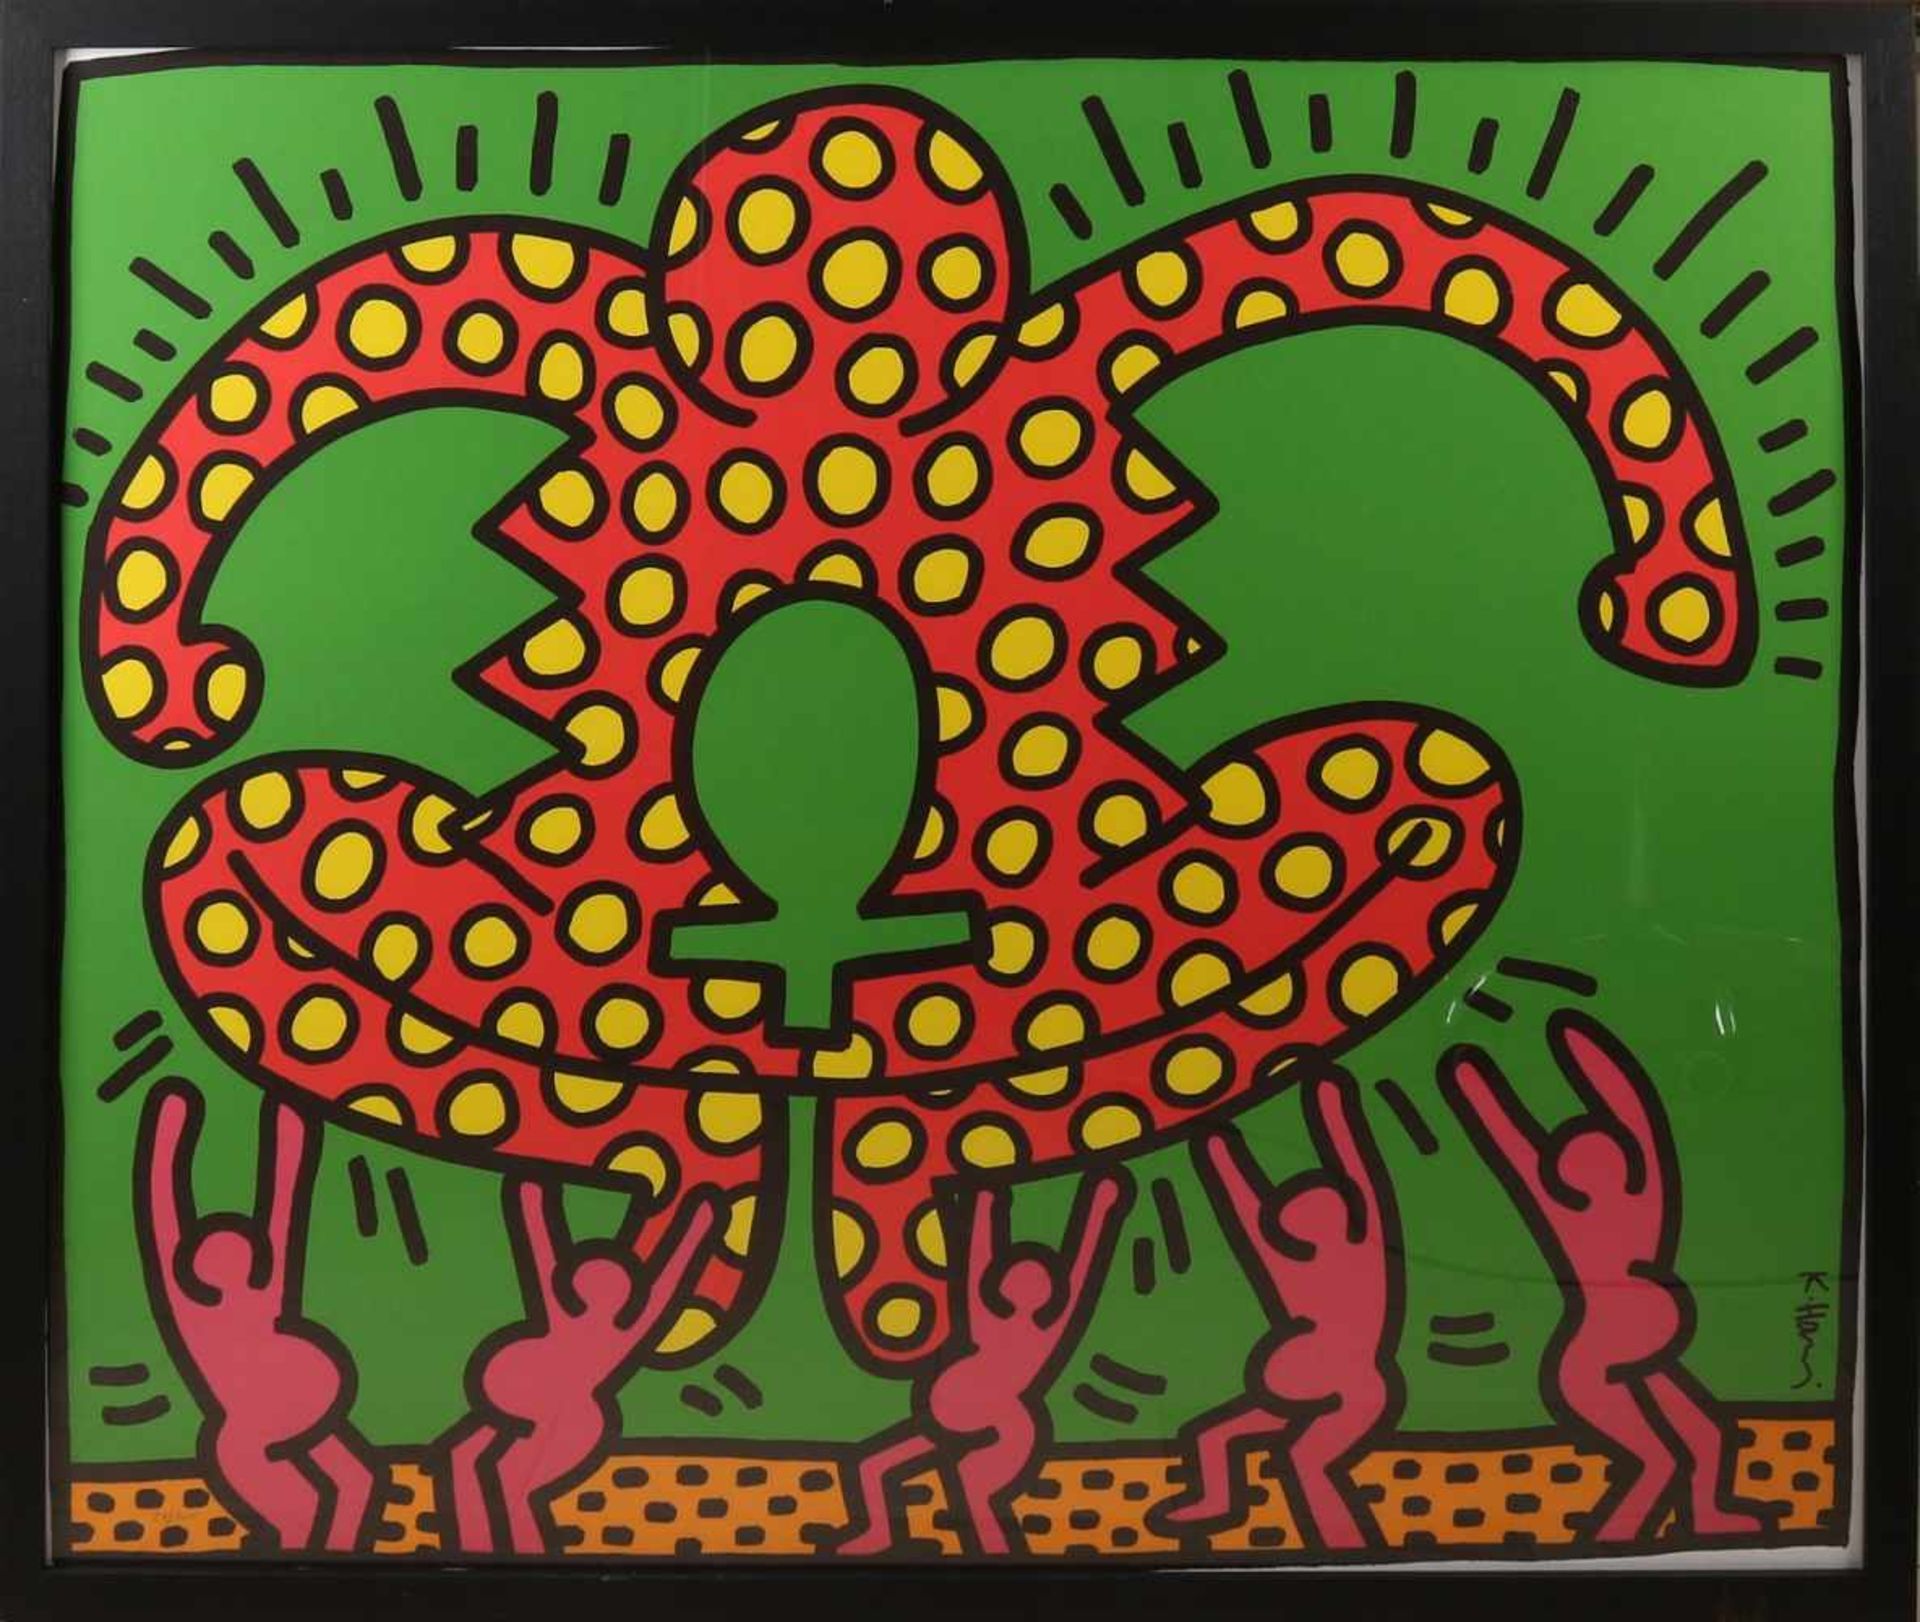 Keith Haring lithography carrying figures, litho paper 90x105 cm in good condition.